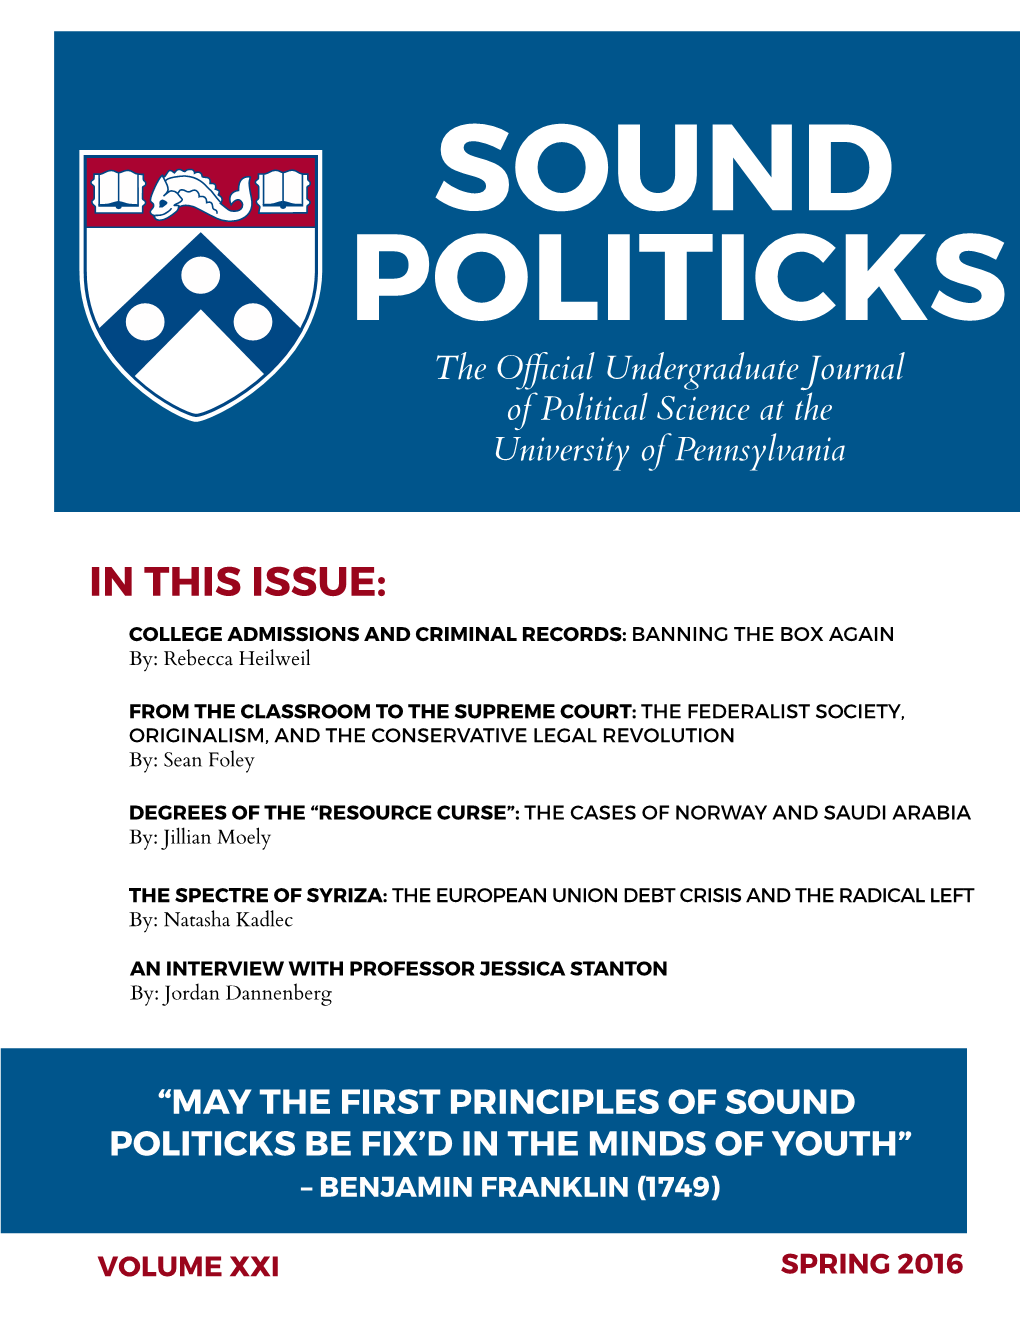 SOUND POLITICKS the Oﬃcial Undergraduate Journal of Political Science at the University of Pennsylvania